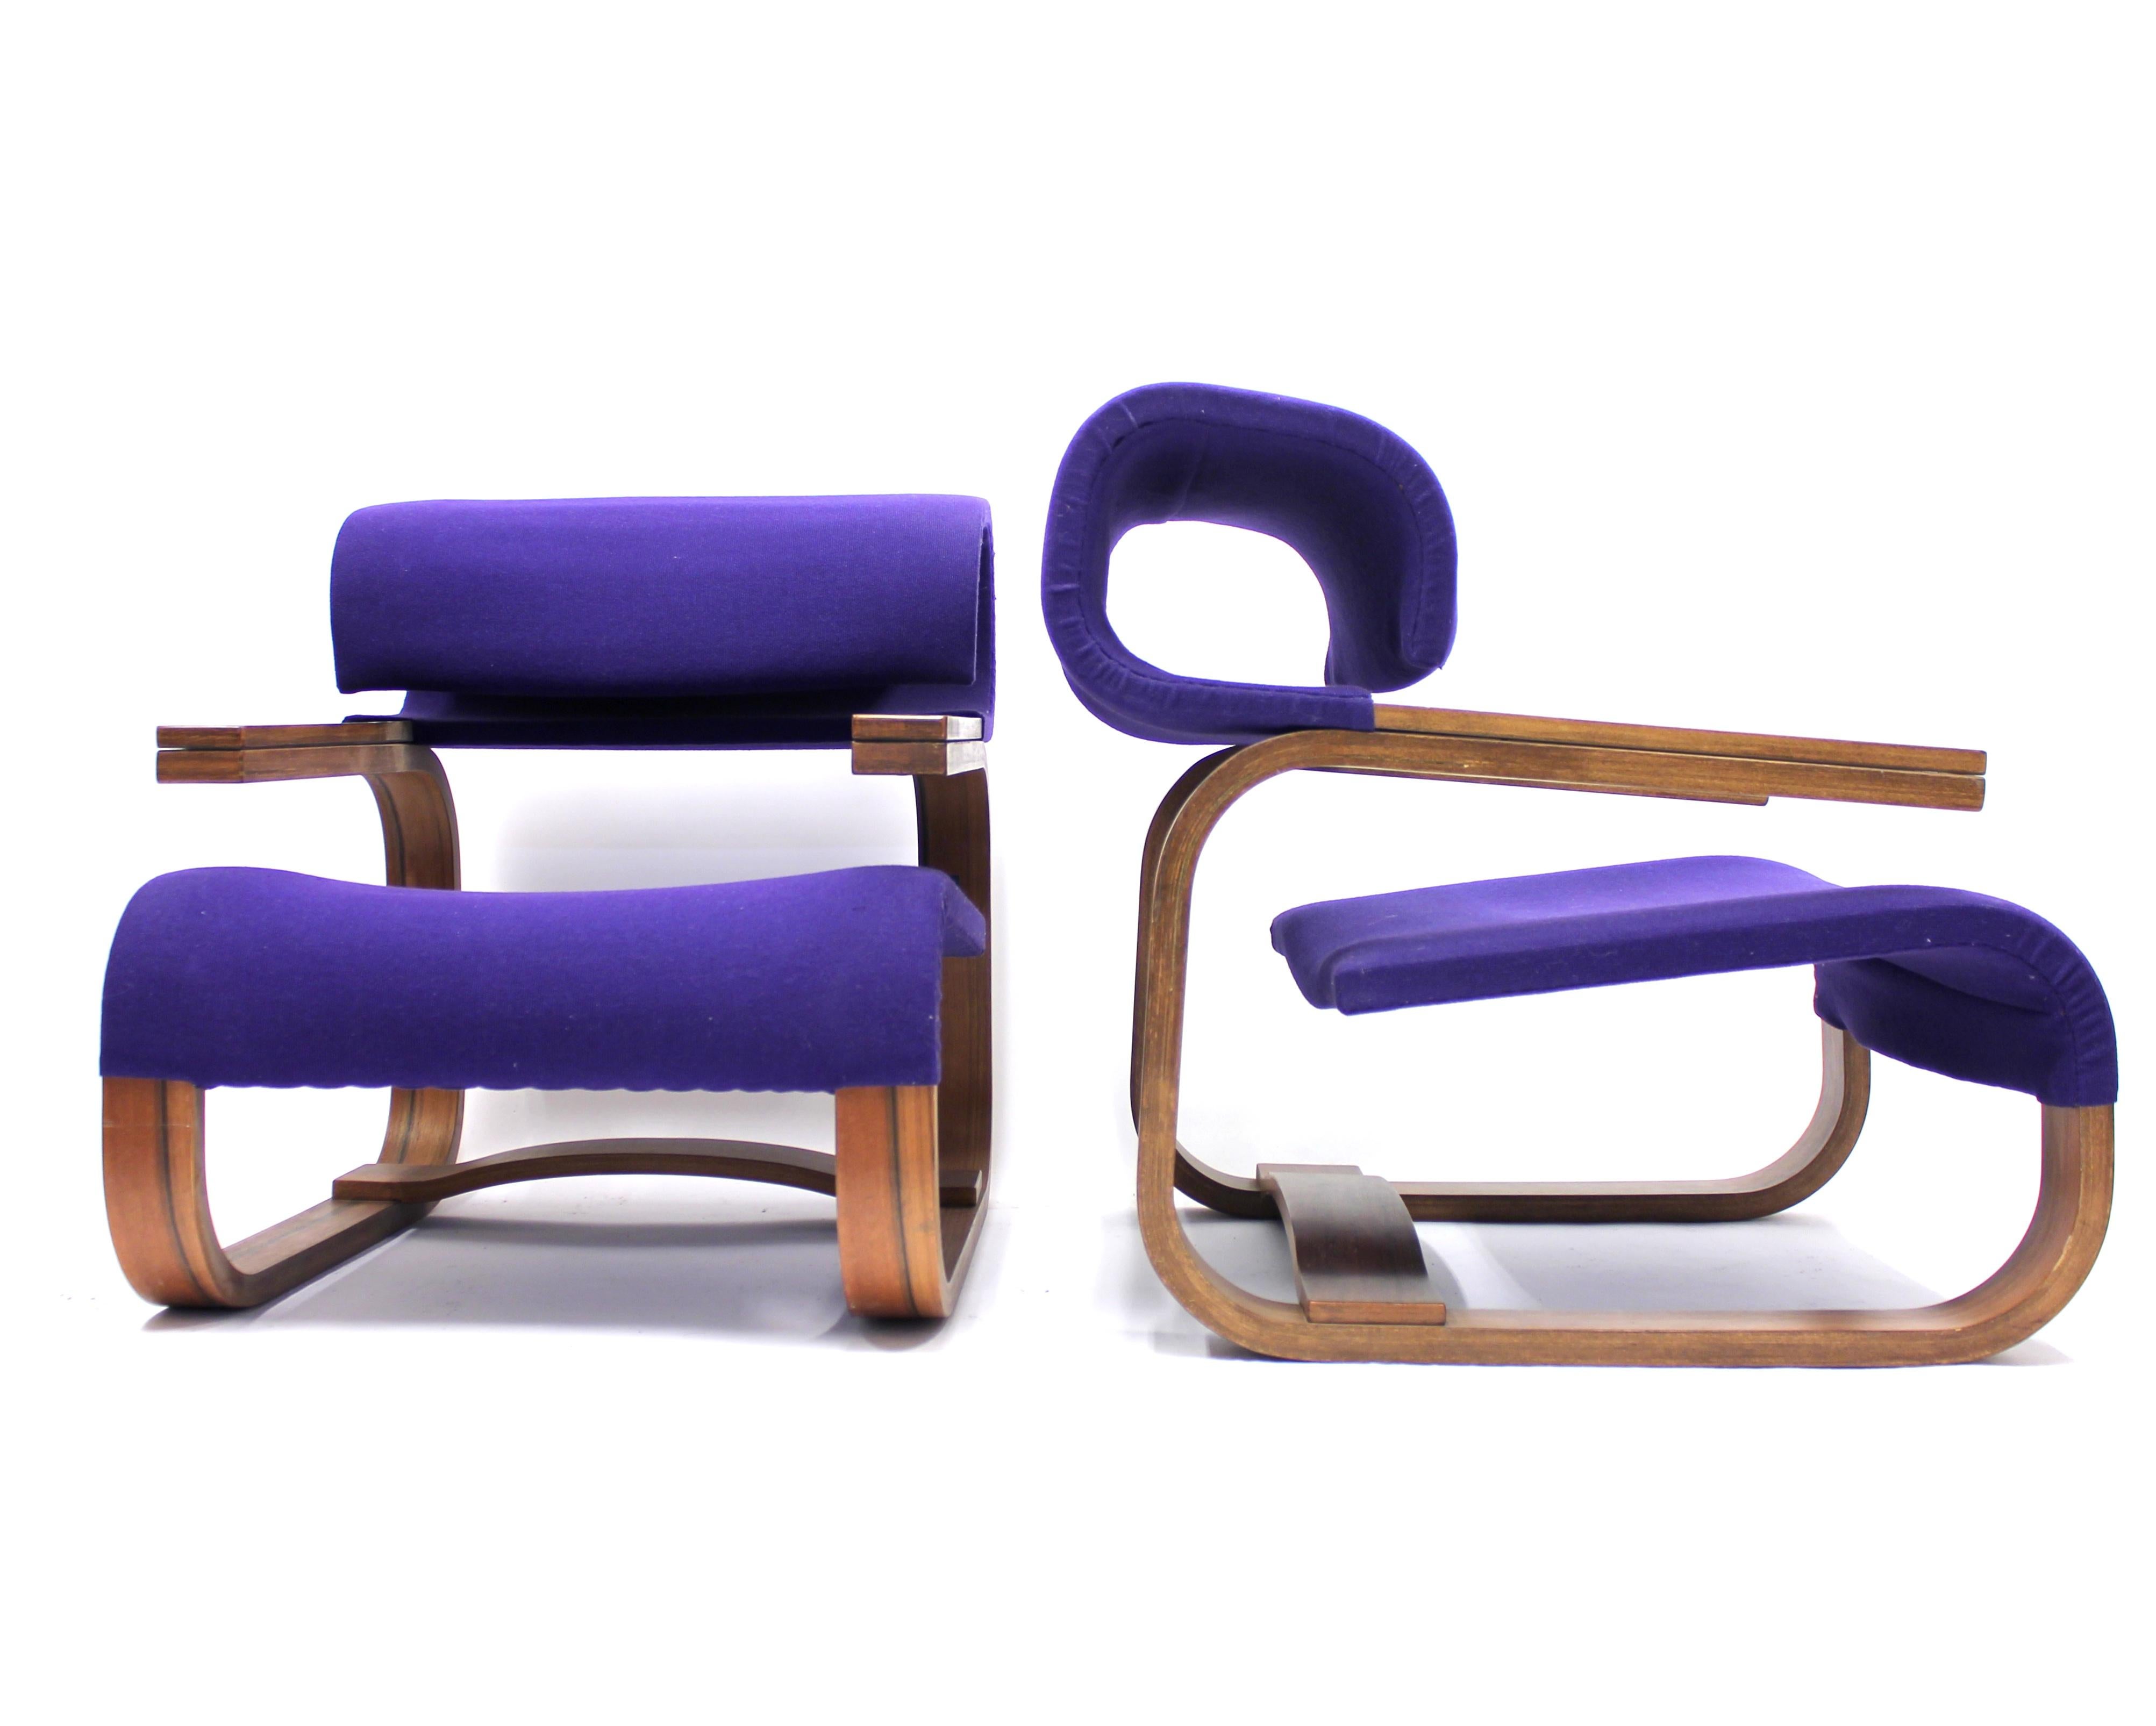 These chairs were designed by the award-winning architect Jan Bocan especially for the Czechoslovakian embassy in Stockholm that was built in the late 1960s and early 1970s. The project was finished in 1972. He also designed all the furniture for